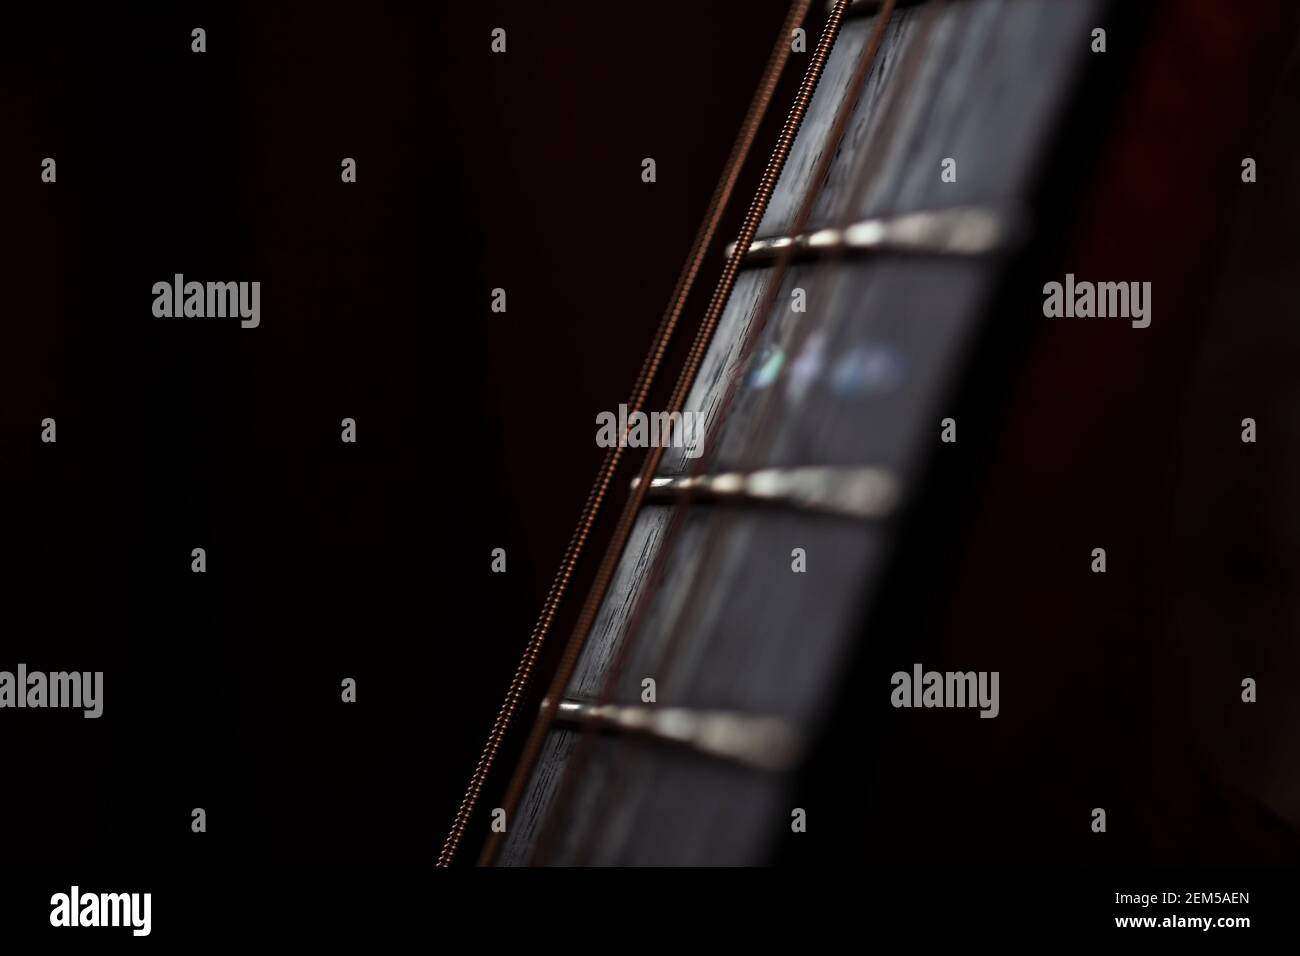 Close up of a steel strung guitars rosewood fretboard or fingerboard.Shot against a dark background.The strings are the phosphor bronze type. Stock Photo